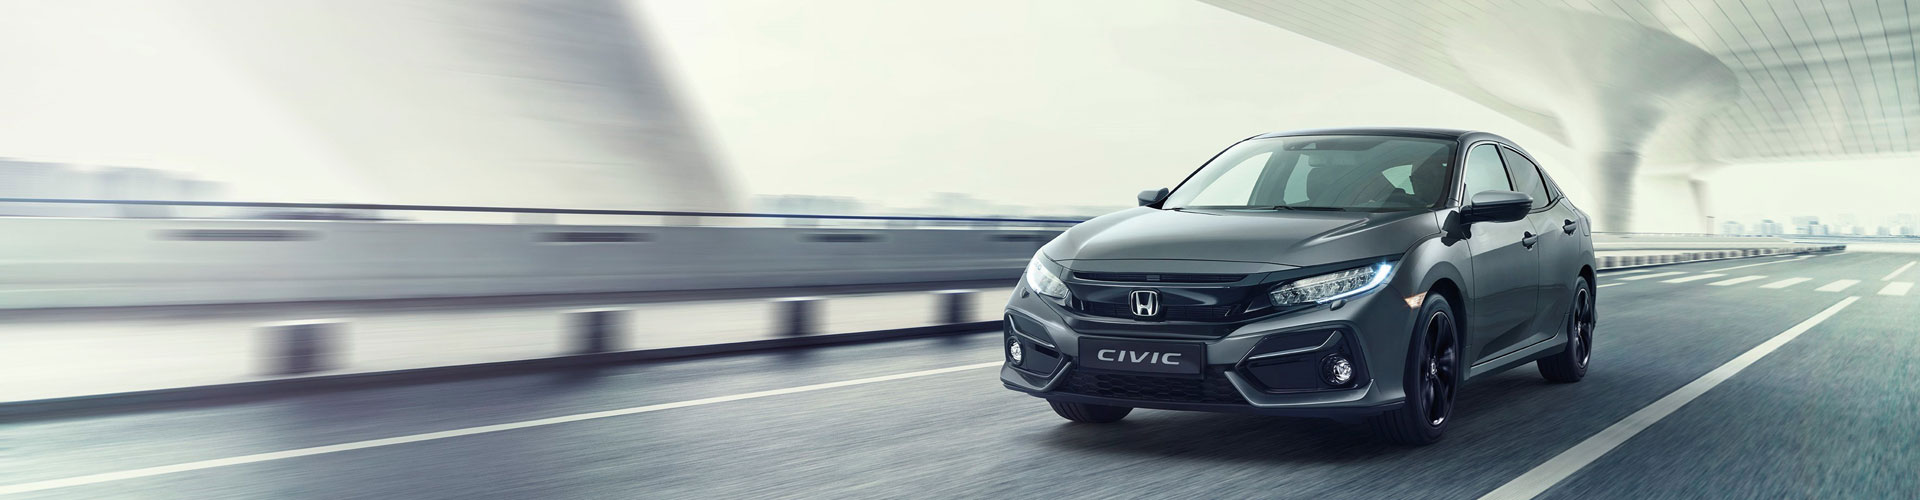 Honda reveals fresh styling and enhanced interior for Civic